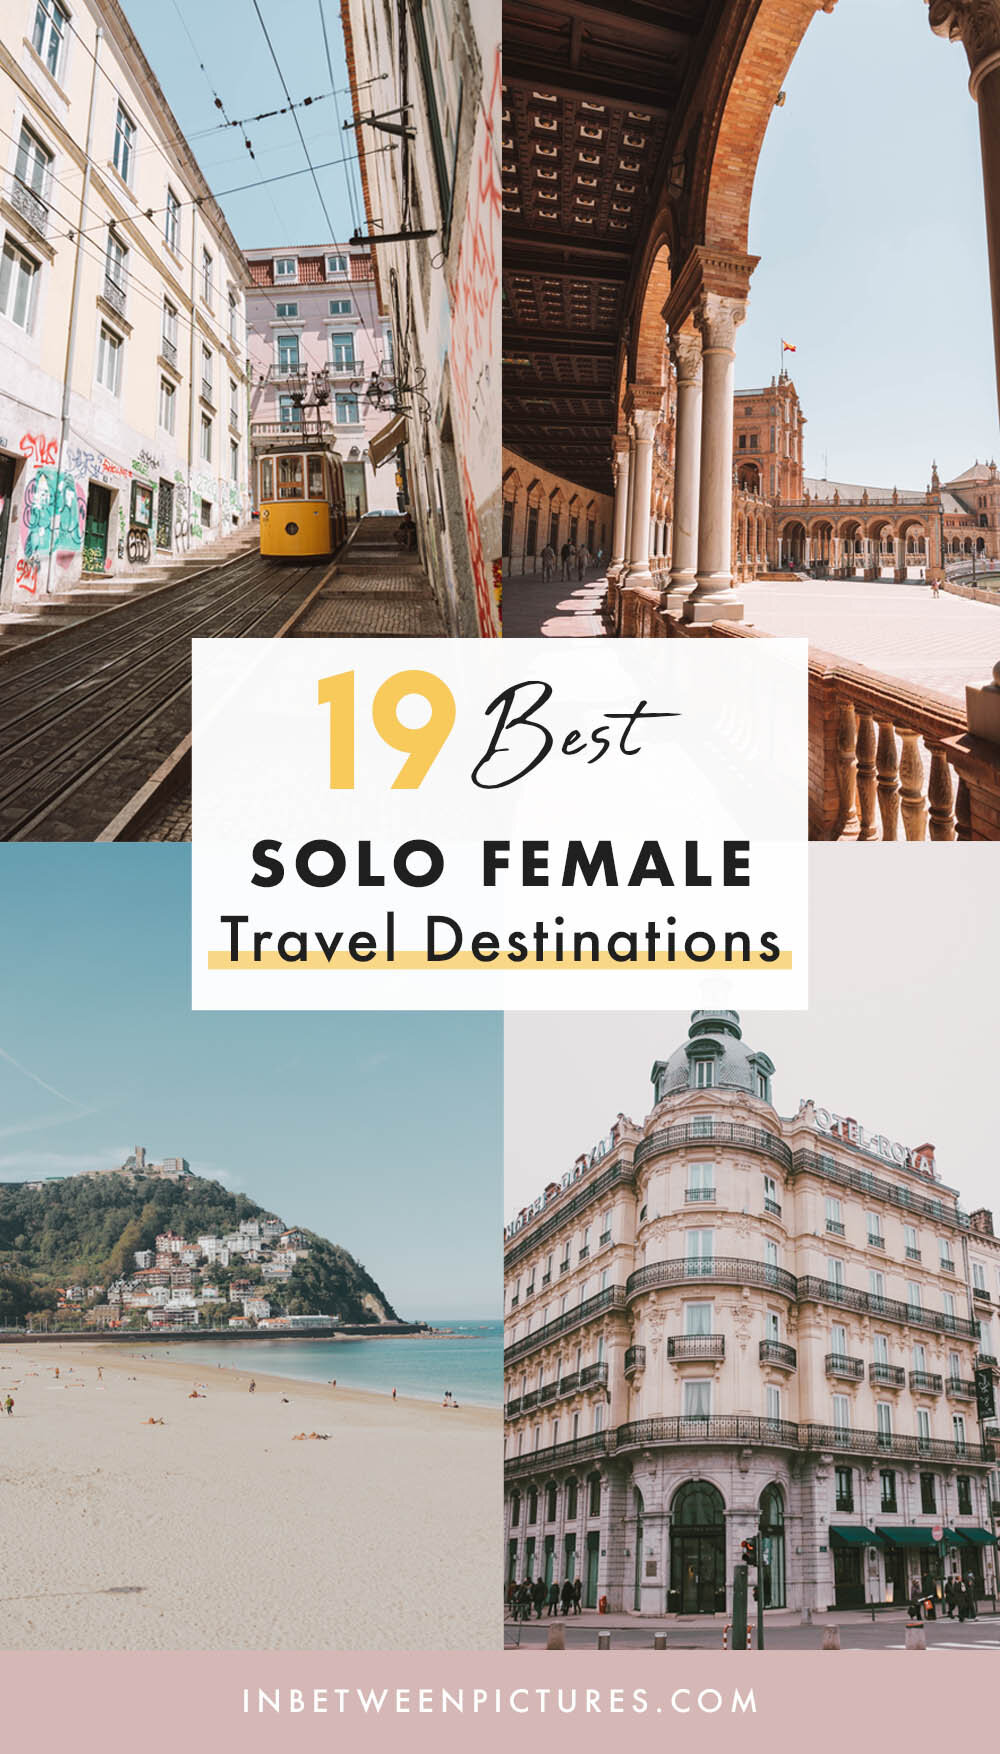 Best Solo female Travel Destination Where to travel alone for the first time as a female? Best First Time Solo Travel Destinations For Female to help you jump-start your solo adventures. #SoloTraveler